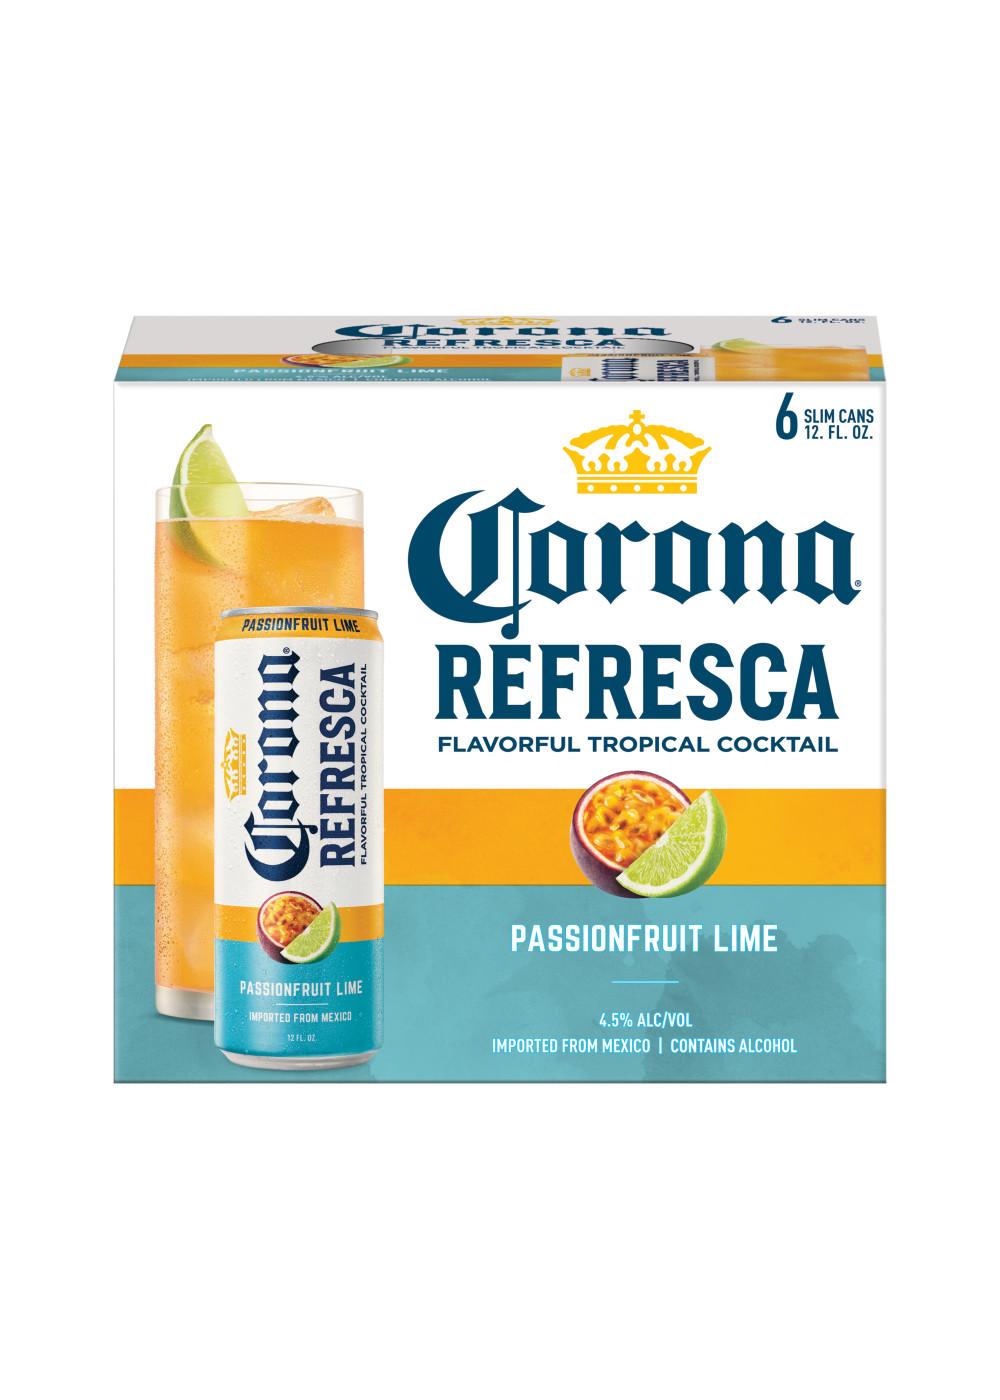 Corona Refresca Passionfruit Lime Spiked Tropical Cocktail 6 pk Cans; image 2 of 3